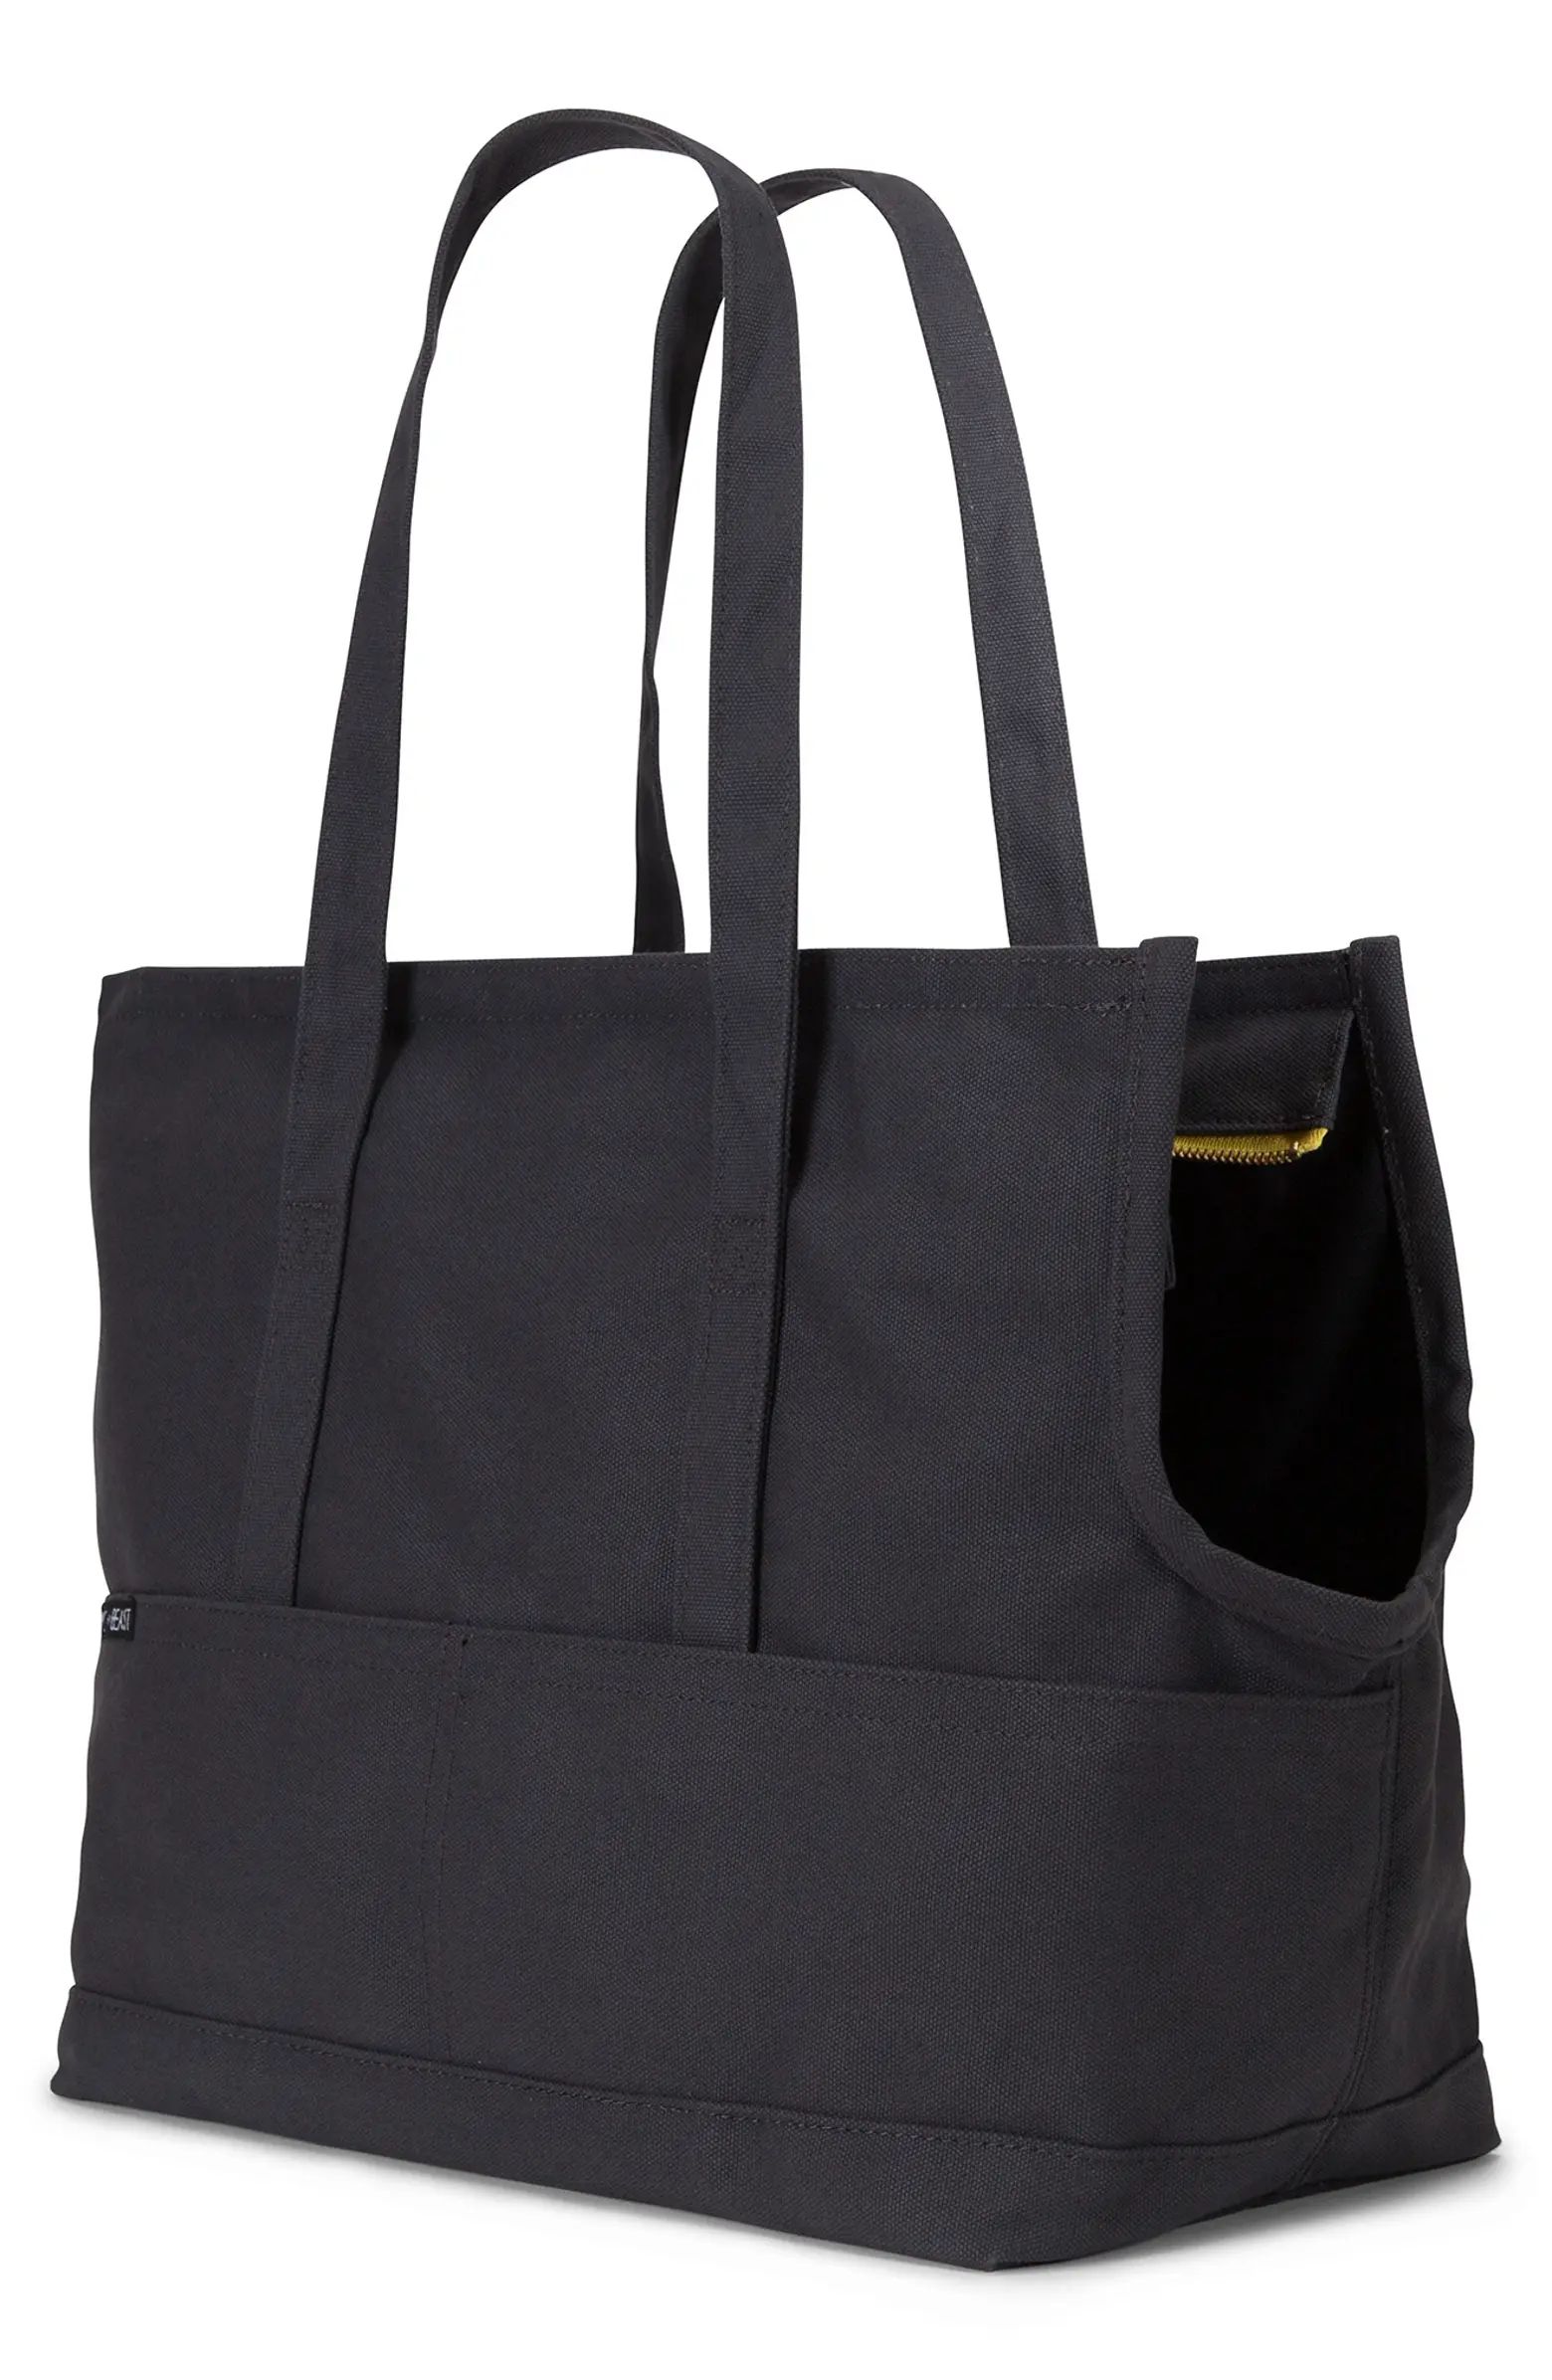 Waxed Canvas Pet Tote Carrier | Nordstrom